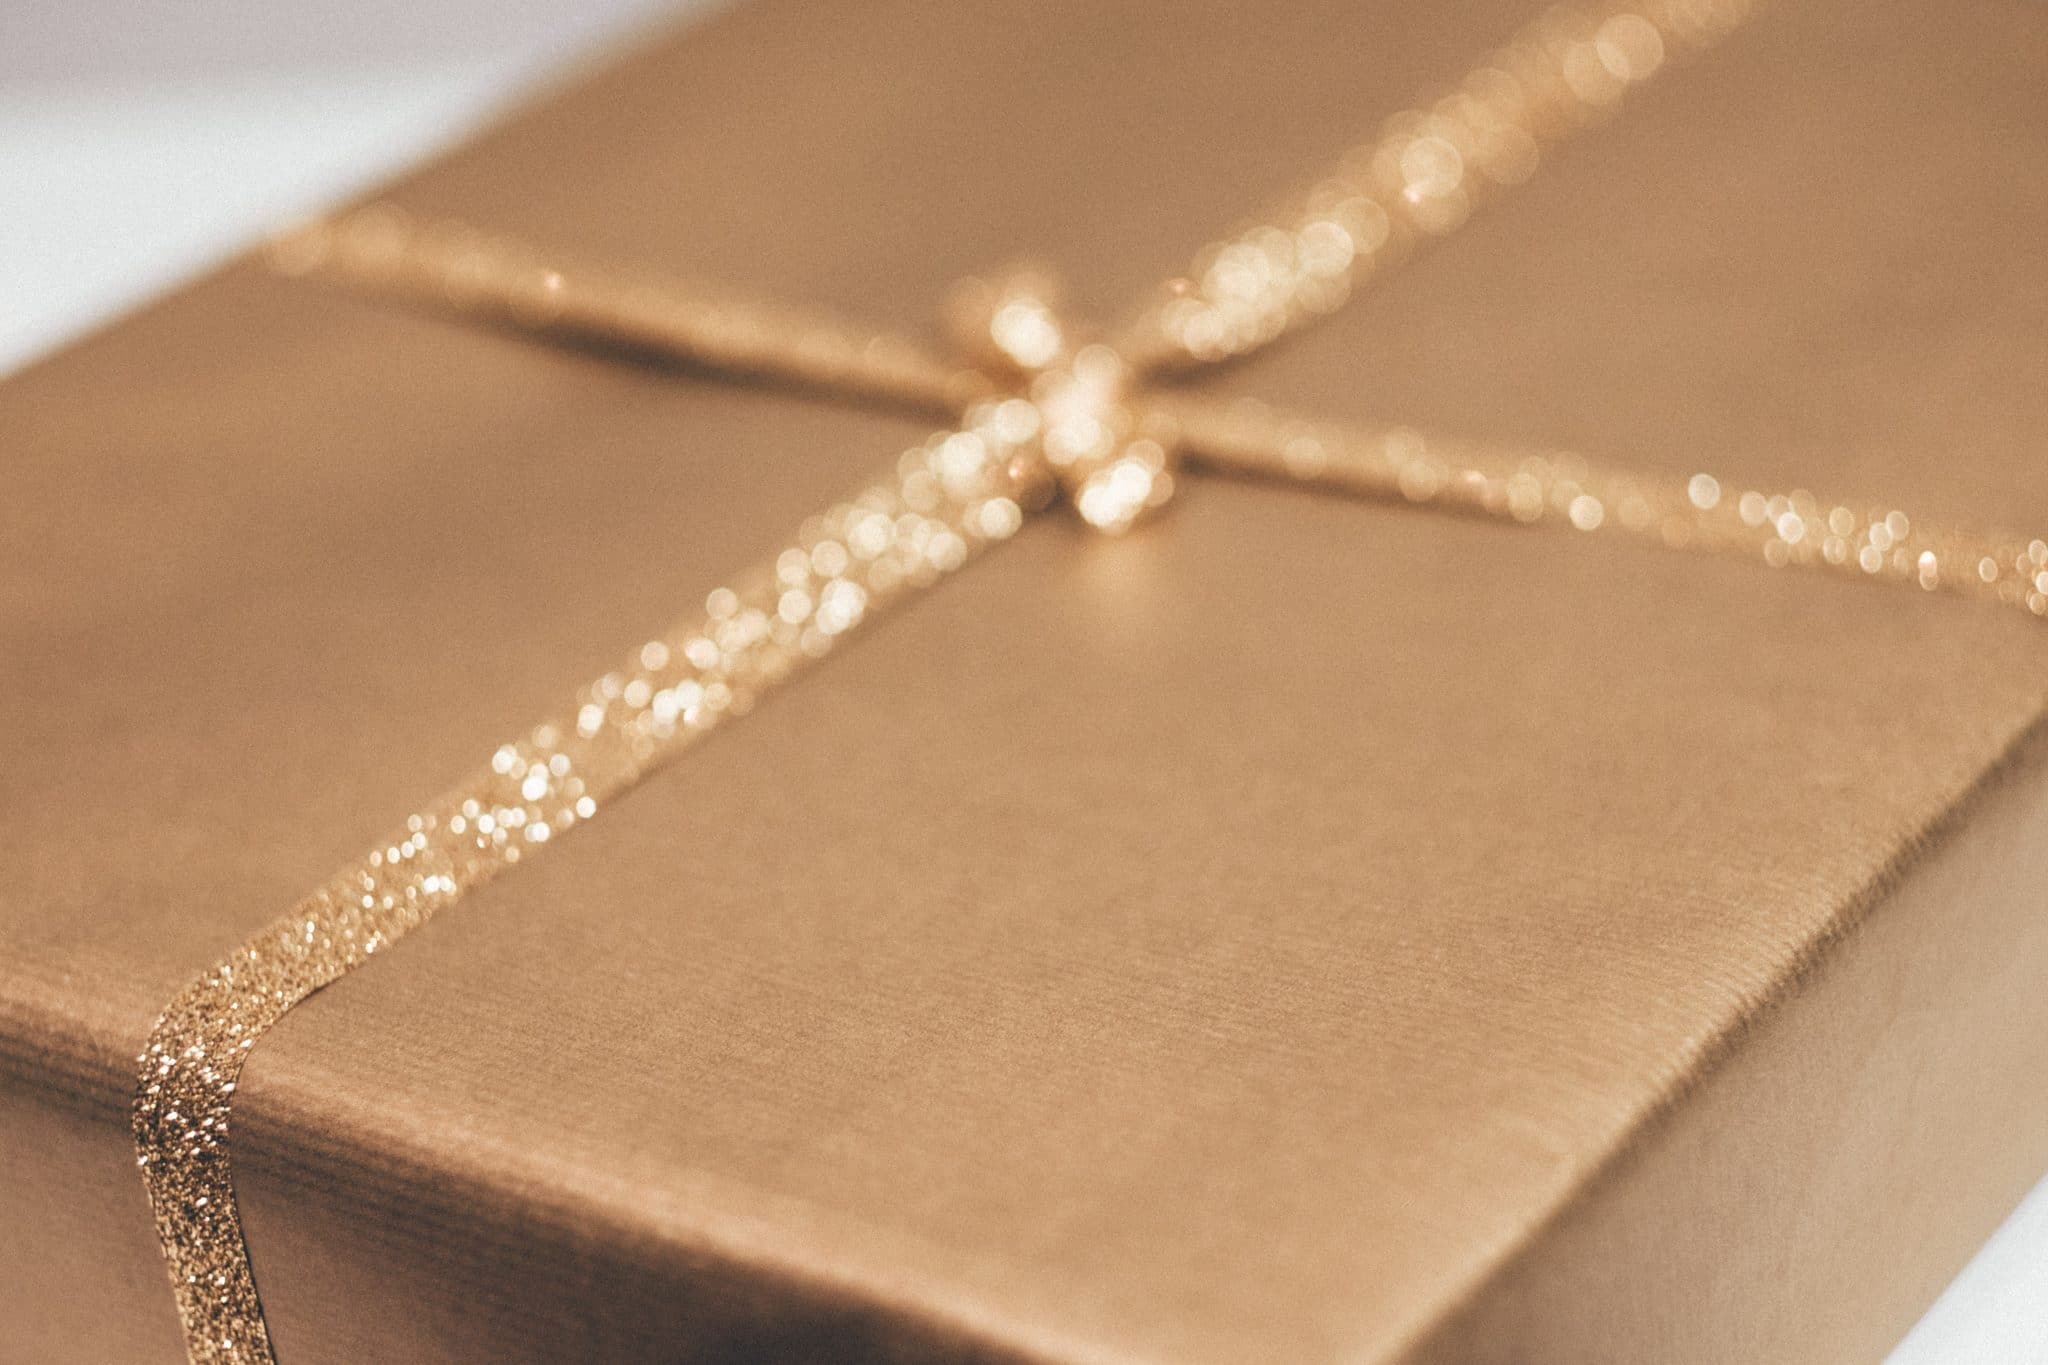 Wedding Gift Wrapping Ideas